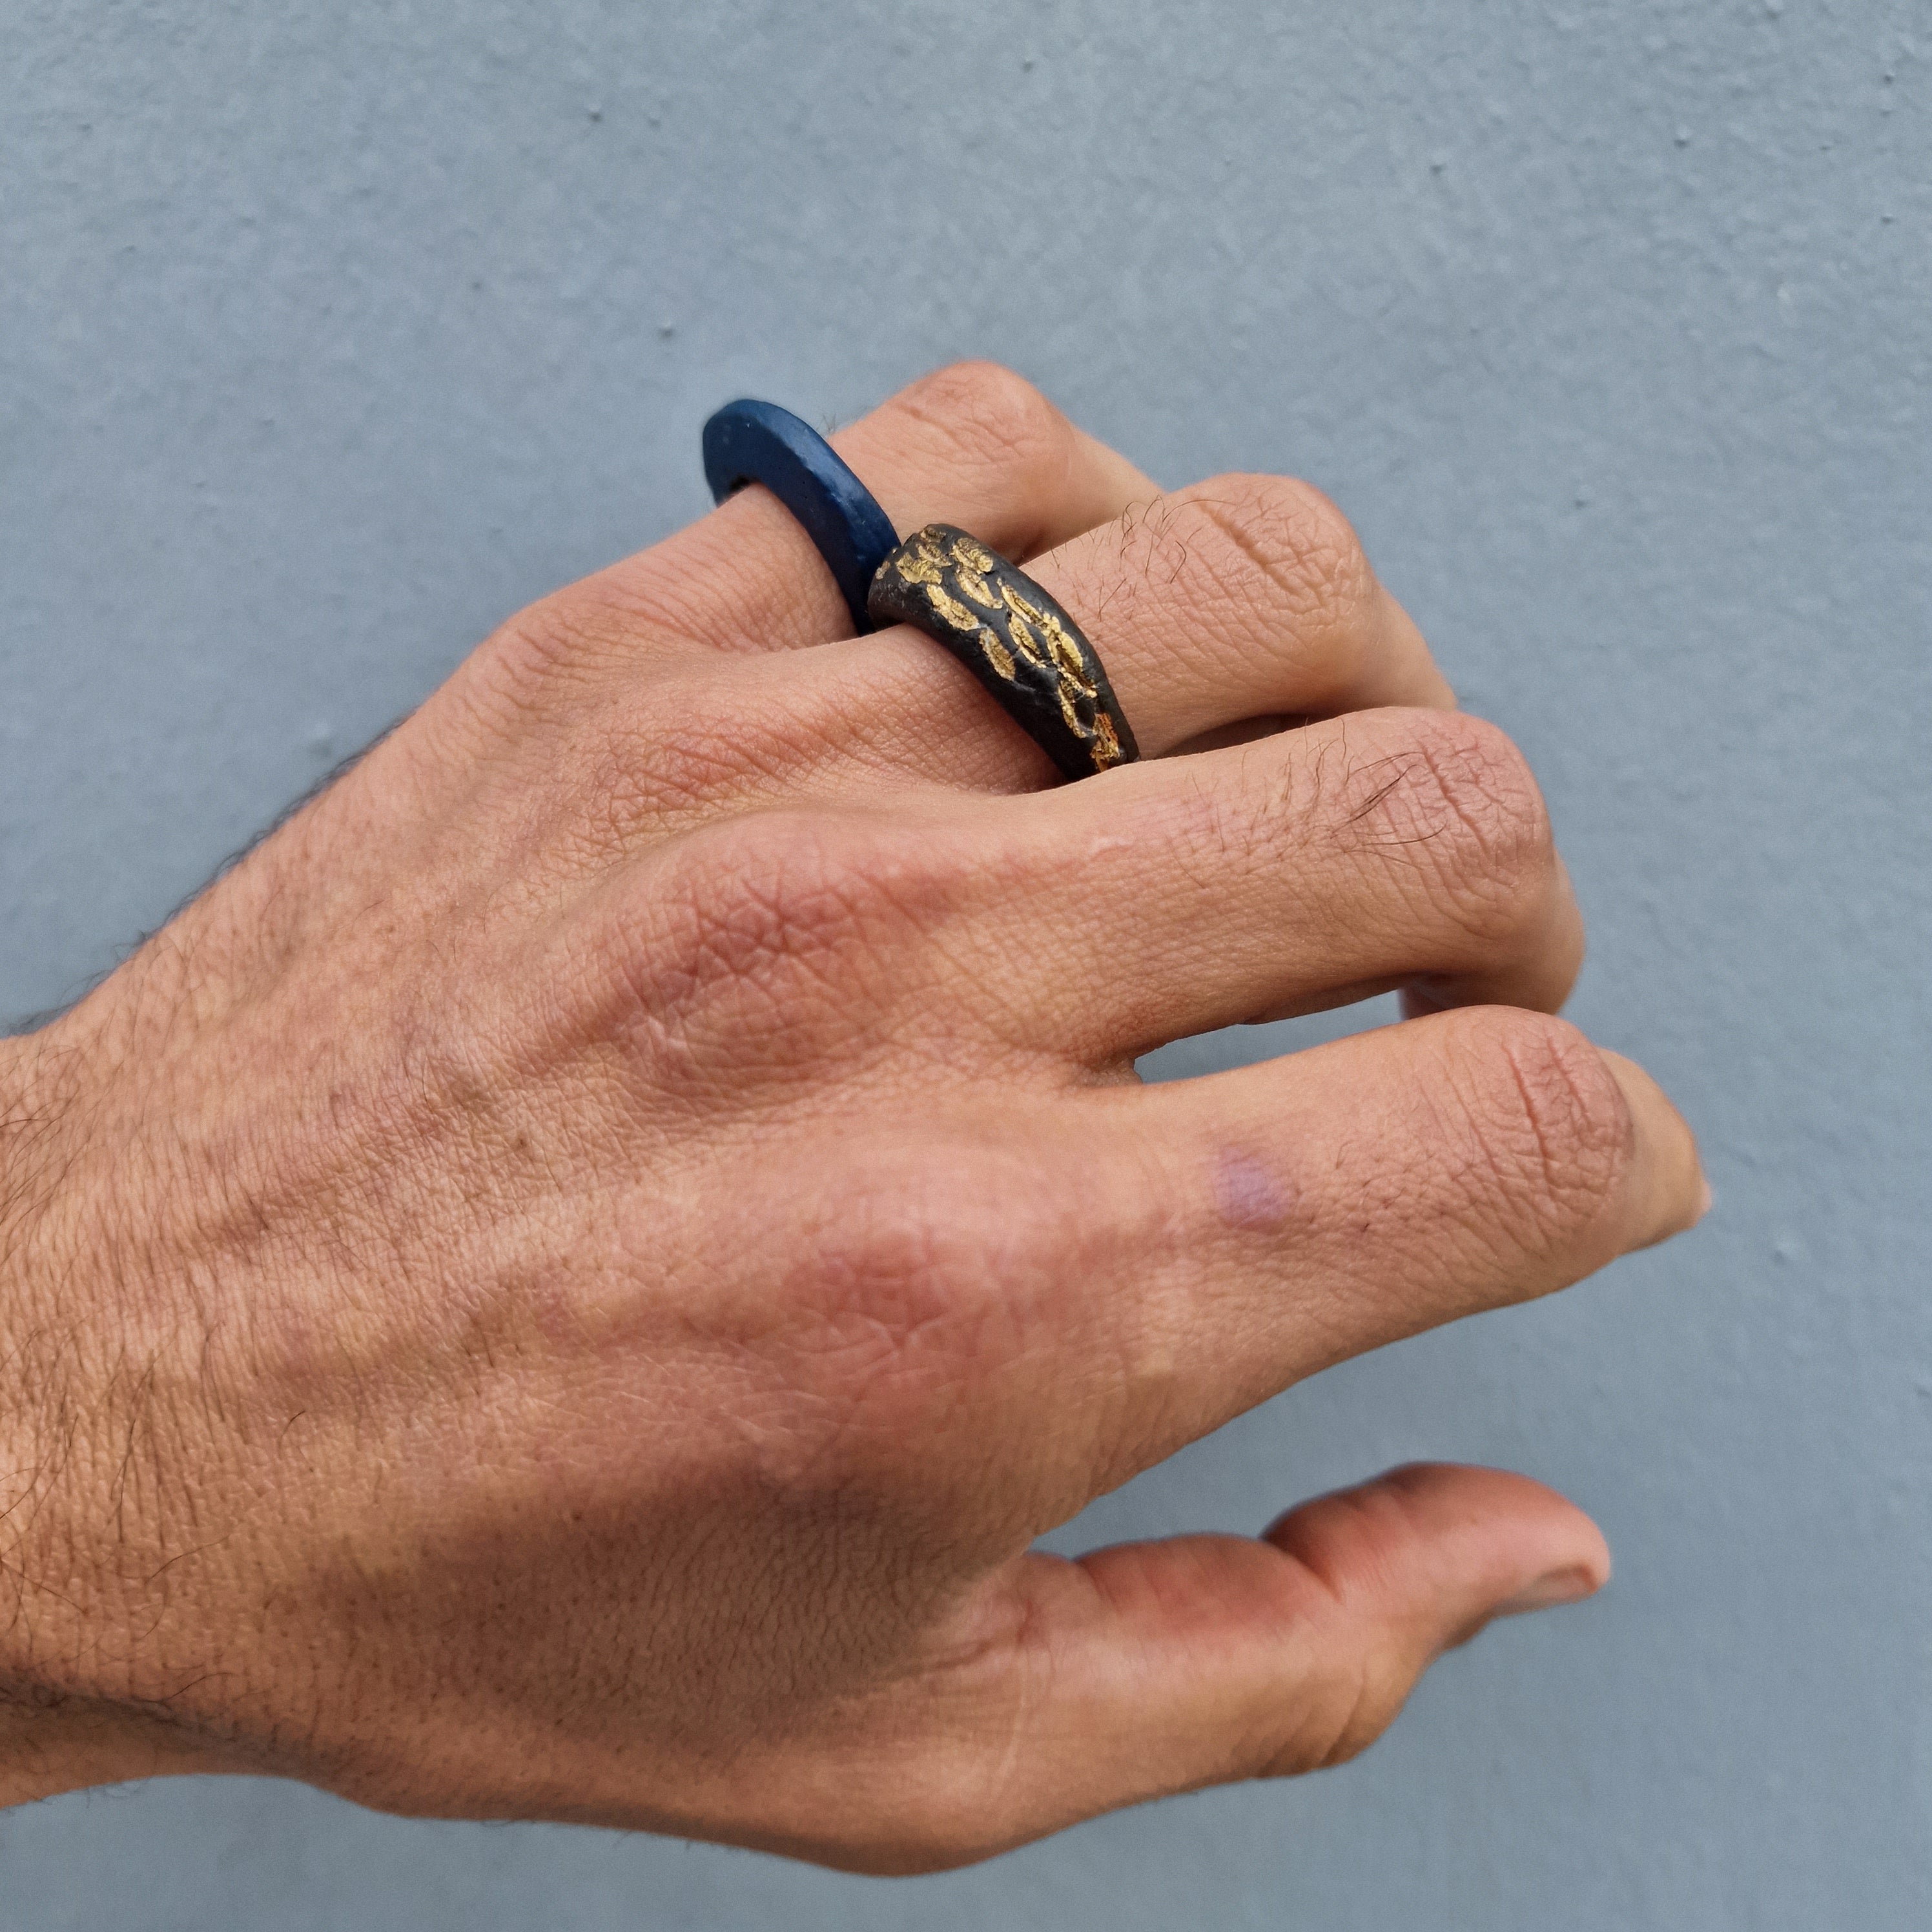 Blue ceramic ring | Ultramarine Blue Statement Ring | Ceramic Handcrafted Rings | Handmade Jewelry | Unique Unisex Rings | Clay Blue Ring